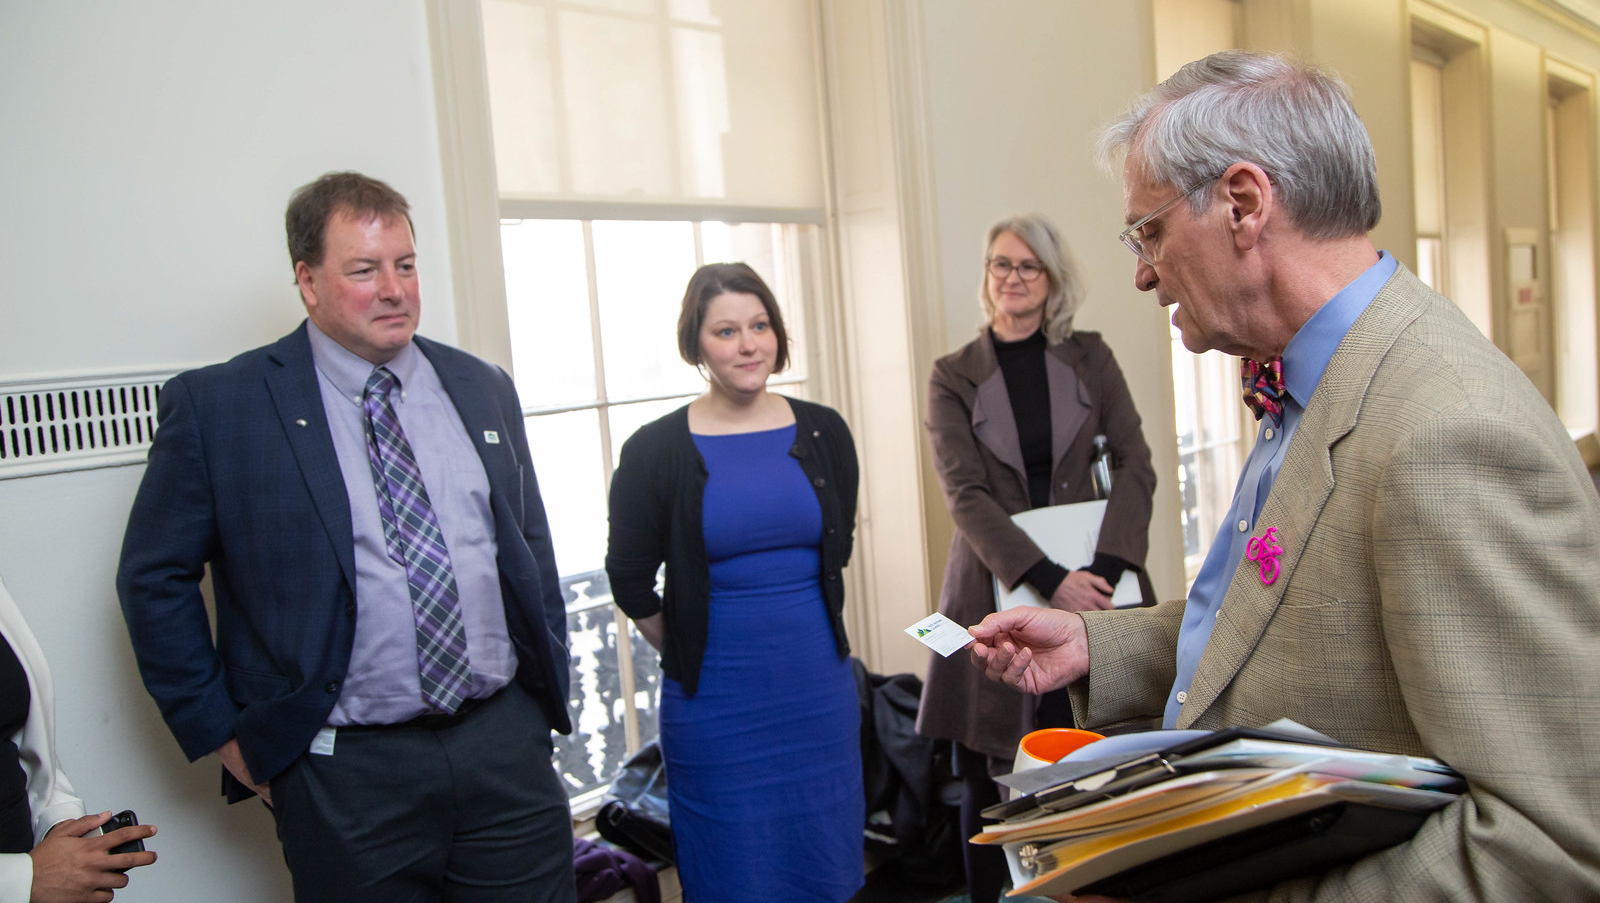 SfN members Ed Bilsky (left) and Mollie Marr (center), and SfN President Diane Lipscombe (center) meet with Rep. Earl Blumenauer (D-OR) during the 2019 Capitol Hill Day.